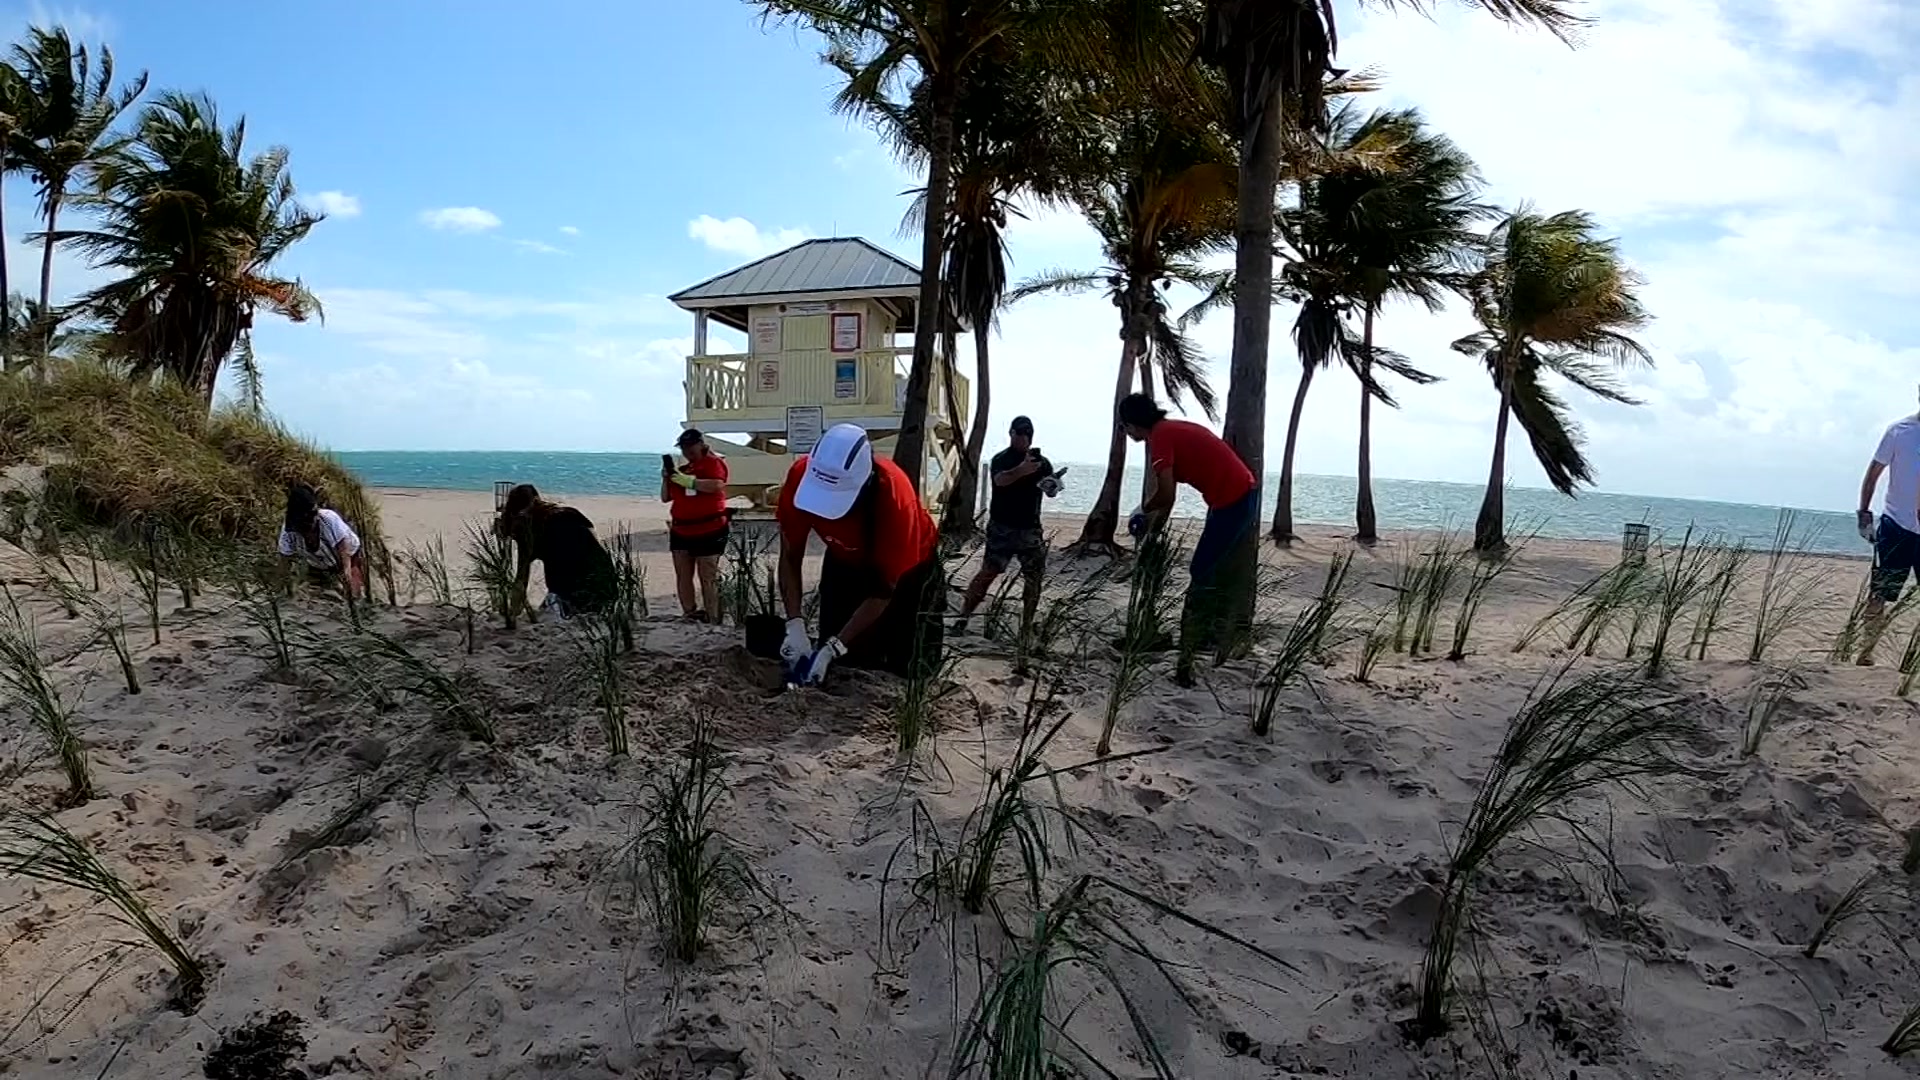 Miami-Dade County Celebrates Earth Day By Cleaning, Planting At Crandon Park